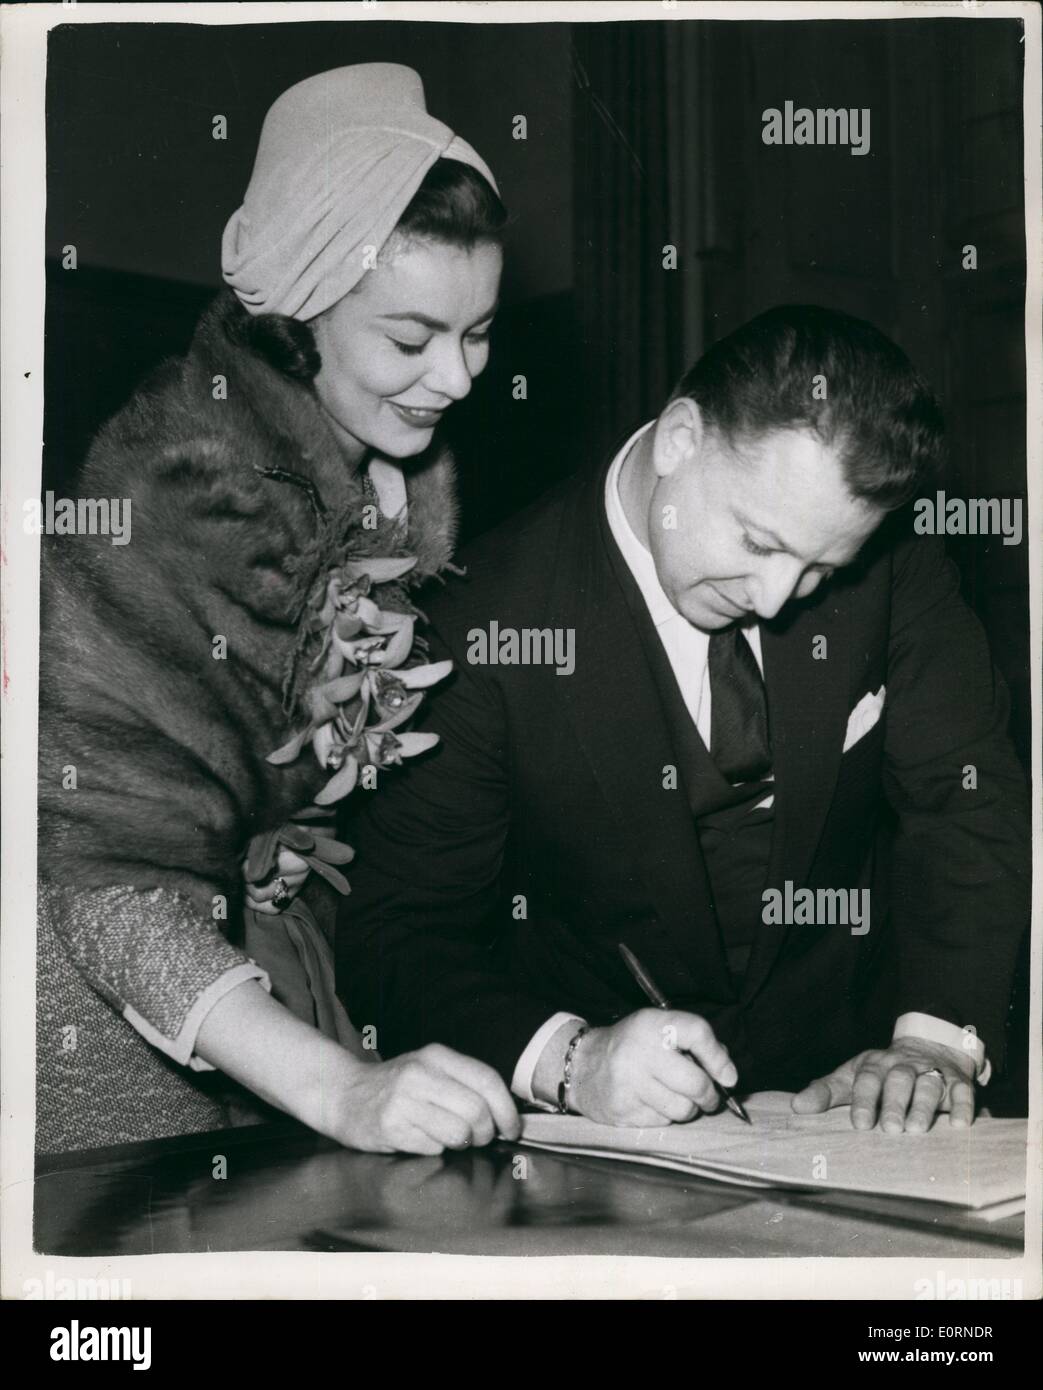 Feb. 02, 1960 - Screen Star Producer - In Zurich : Screen star Anne Heywood (28) and producer Raymond Stross (43) were married at the Town Hall in Zurich on Friday. Photo shows The Bride and Bridegroom sign the register - at their wedding on Saturday. Stock Photo